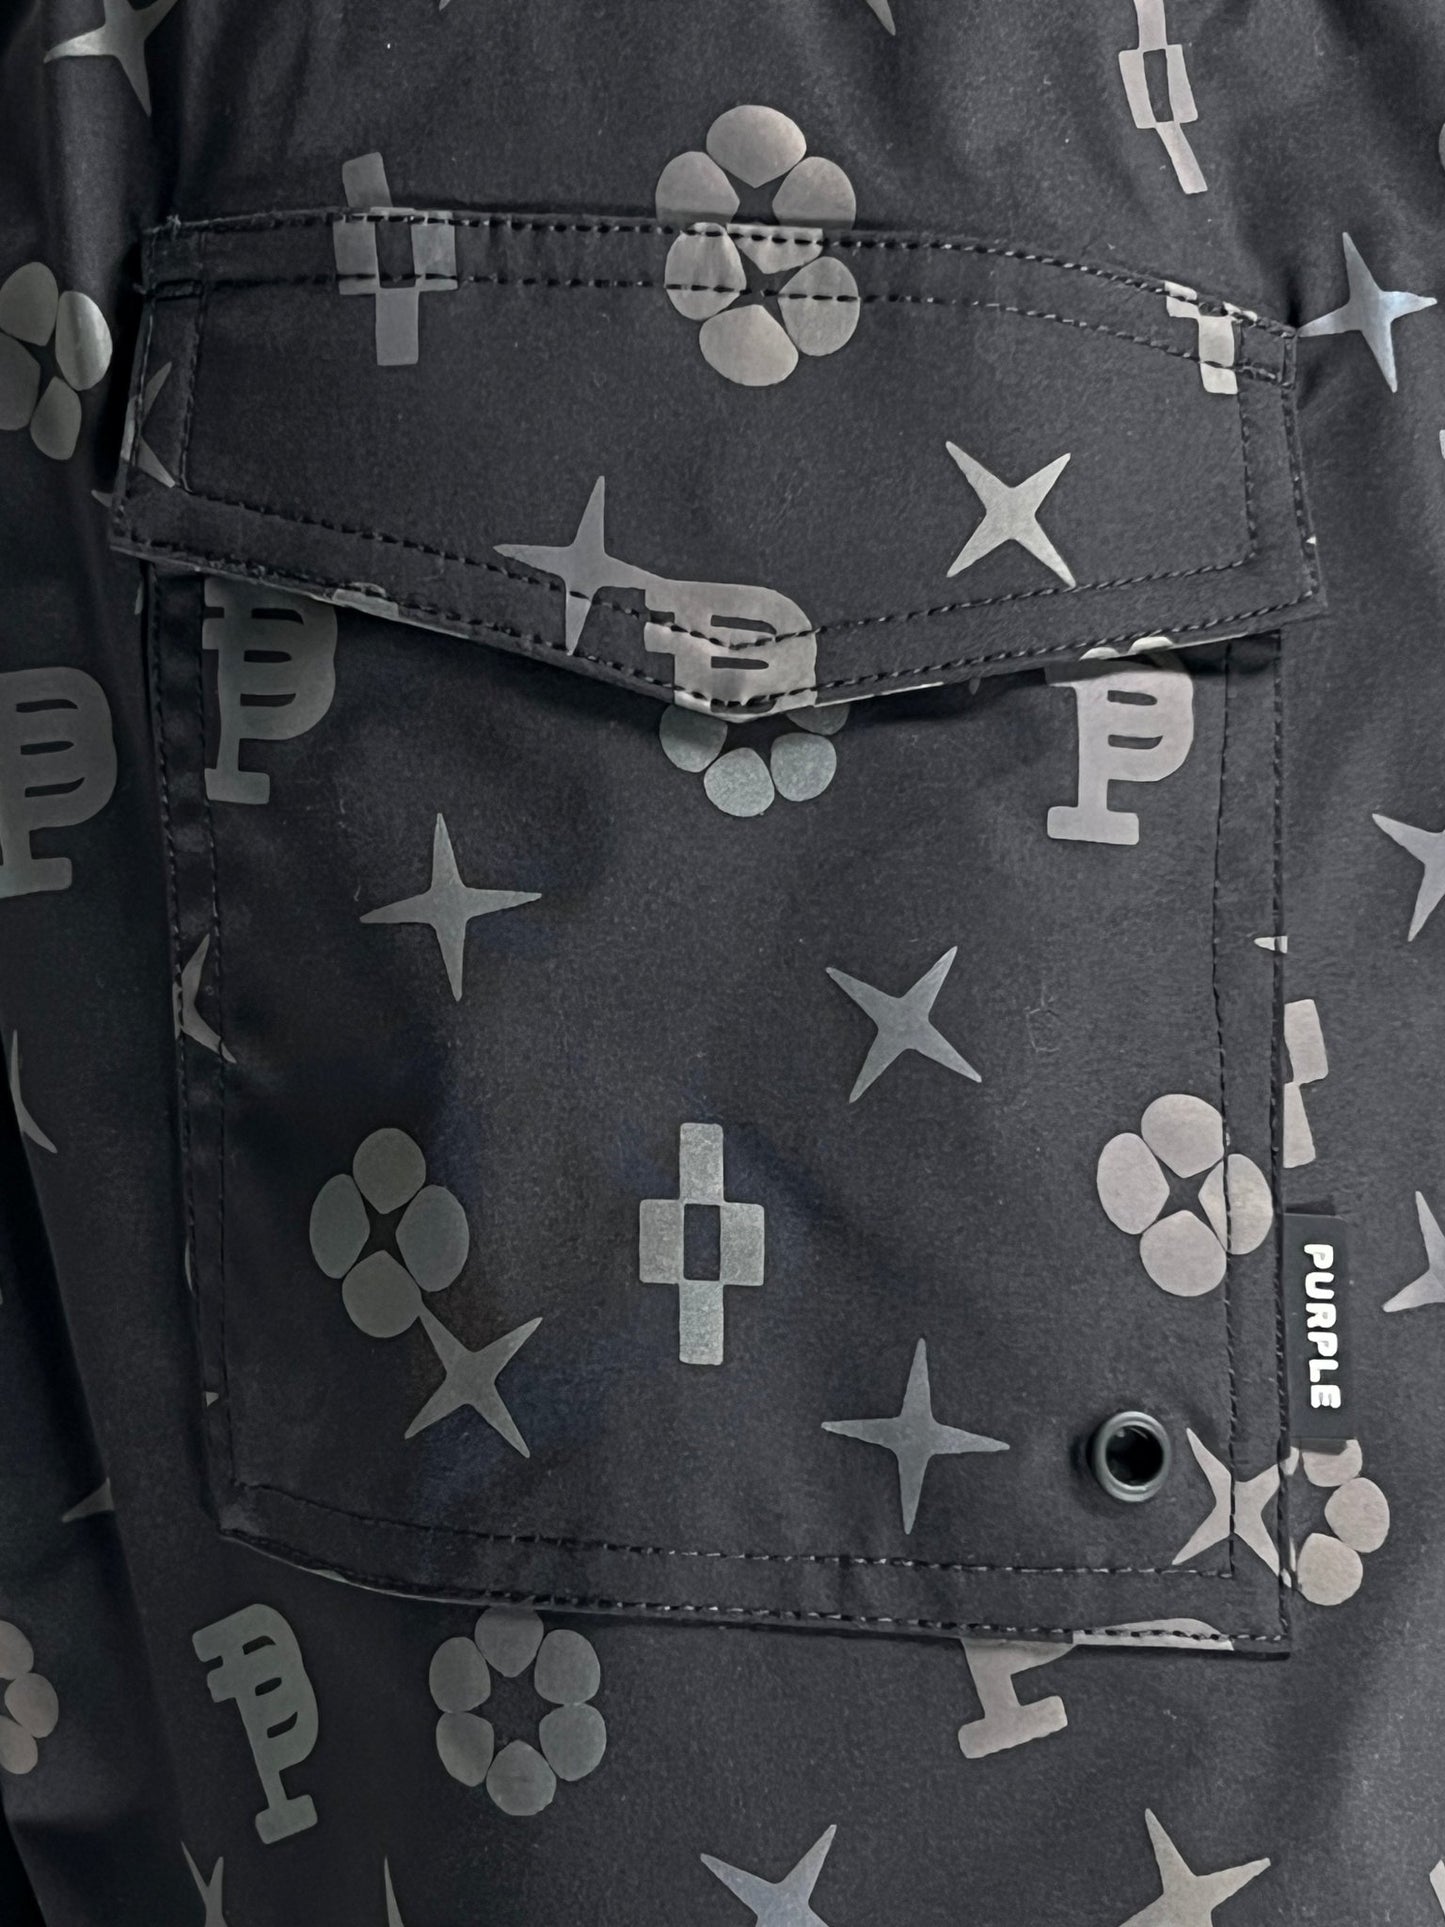 Close-up of a black fabric pocket with various gray symbols, including stars, crosses, and letters, along with the word "PURPLE." The pocket has a flap secured with a buttonhole, highlighting the unique design often seen in PURPLE BRAND P504-PBBH ALL ROUND SHORT AOP by PURPLE BRAND.